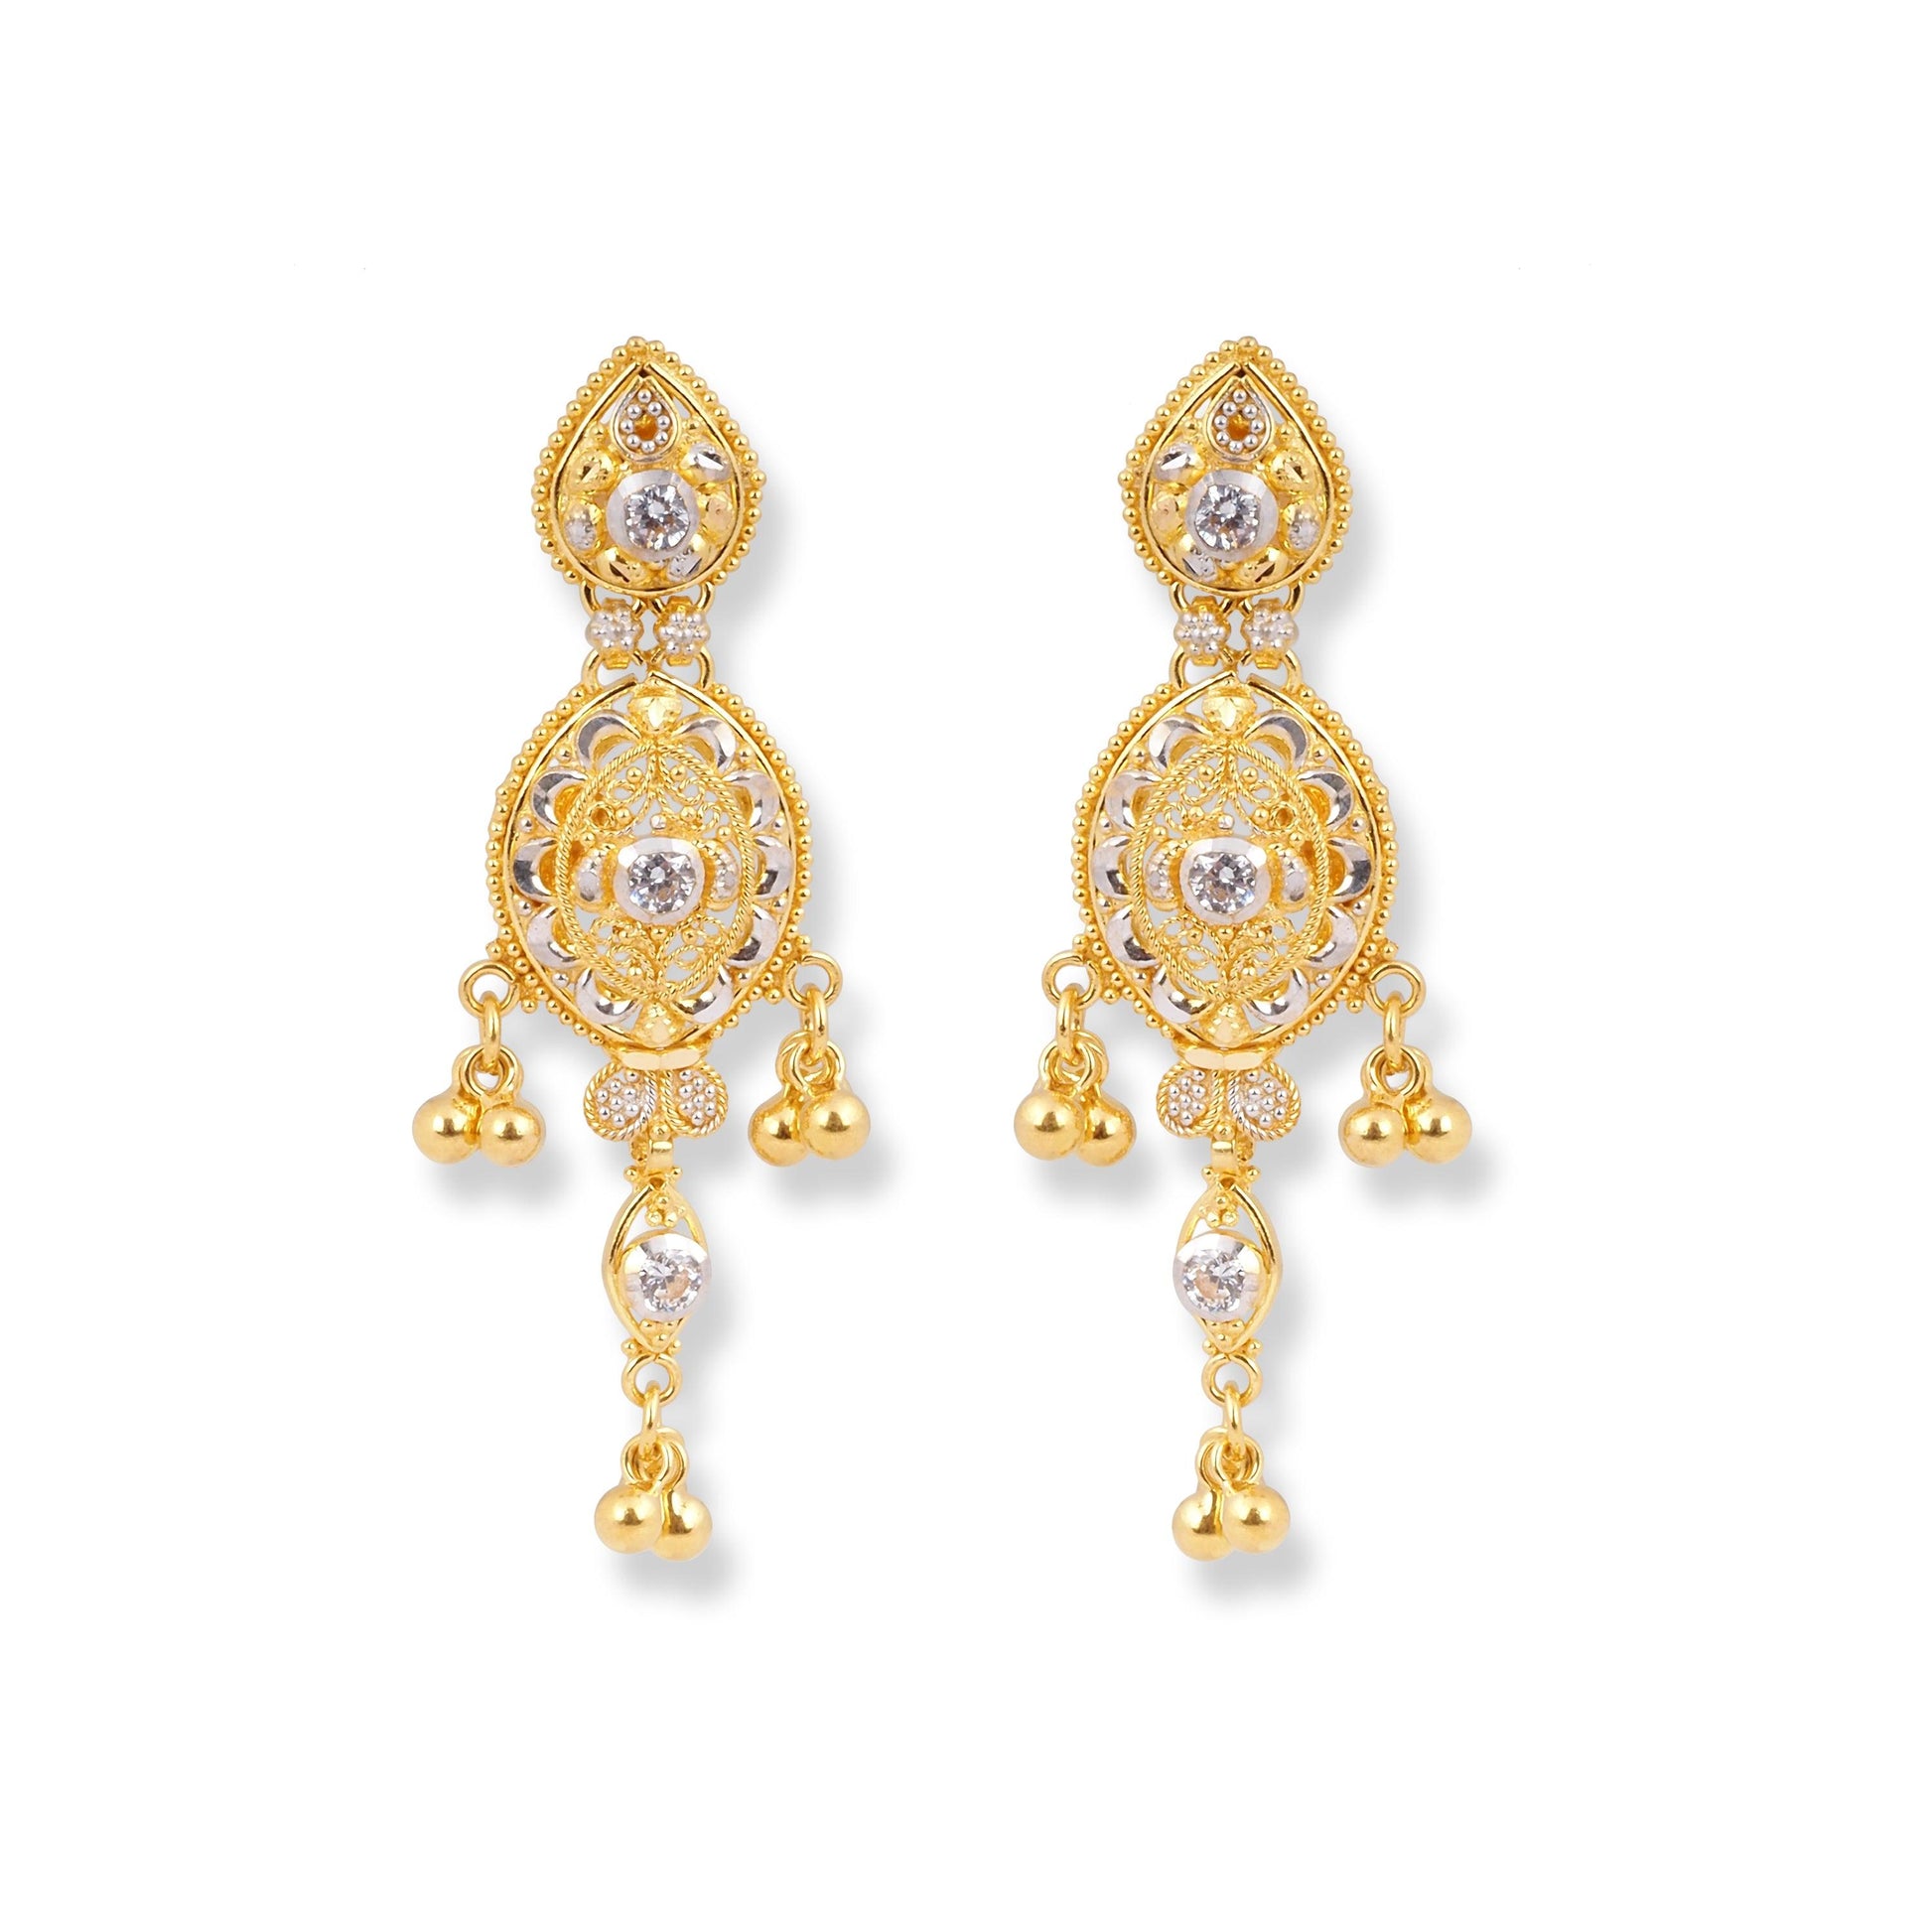 22ct Yellow Gold Necklace & Earrings in Cubic Zirconia Stones & Rhodium Plating Design - Minar Jewellers